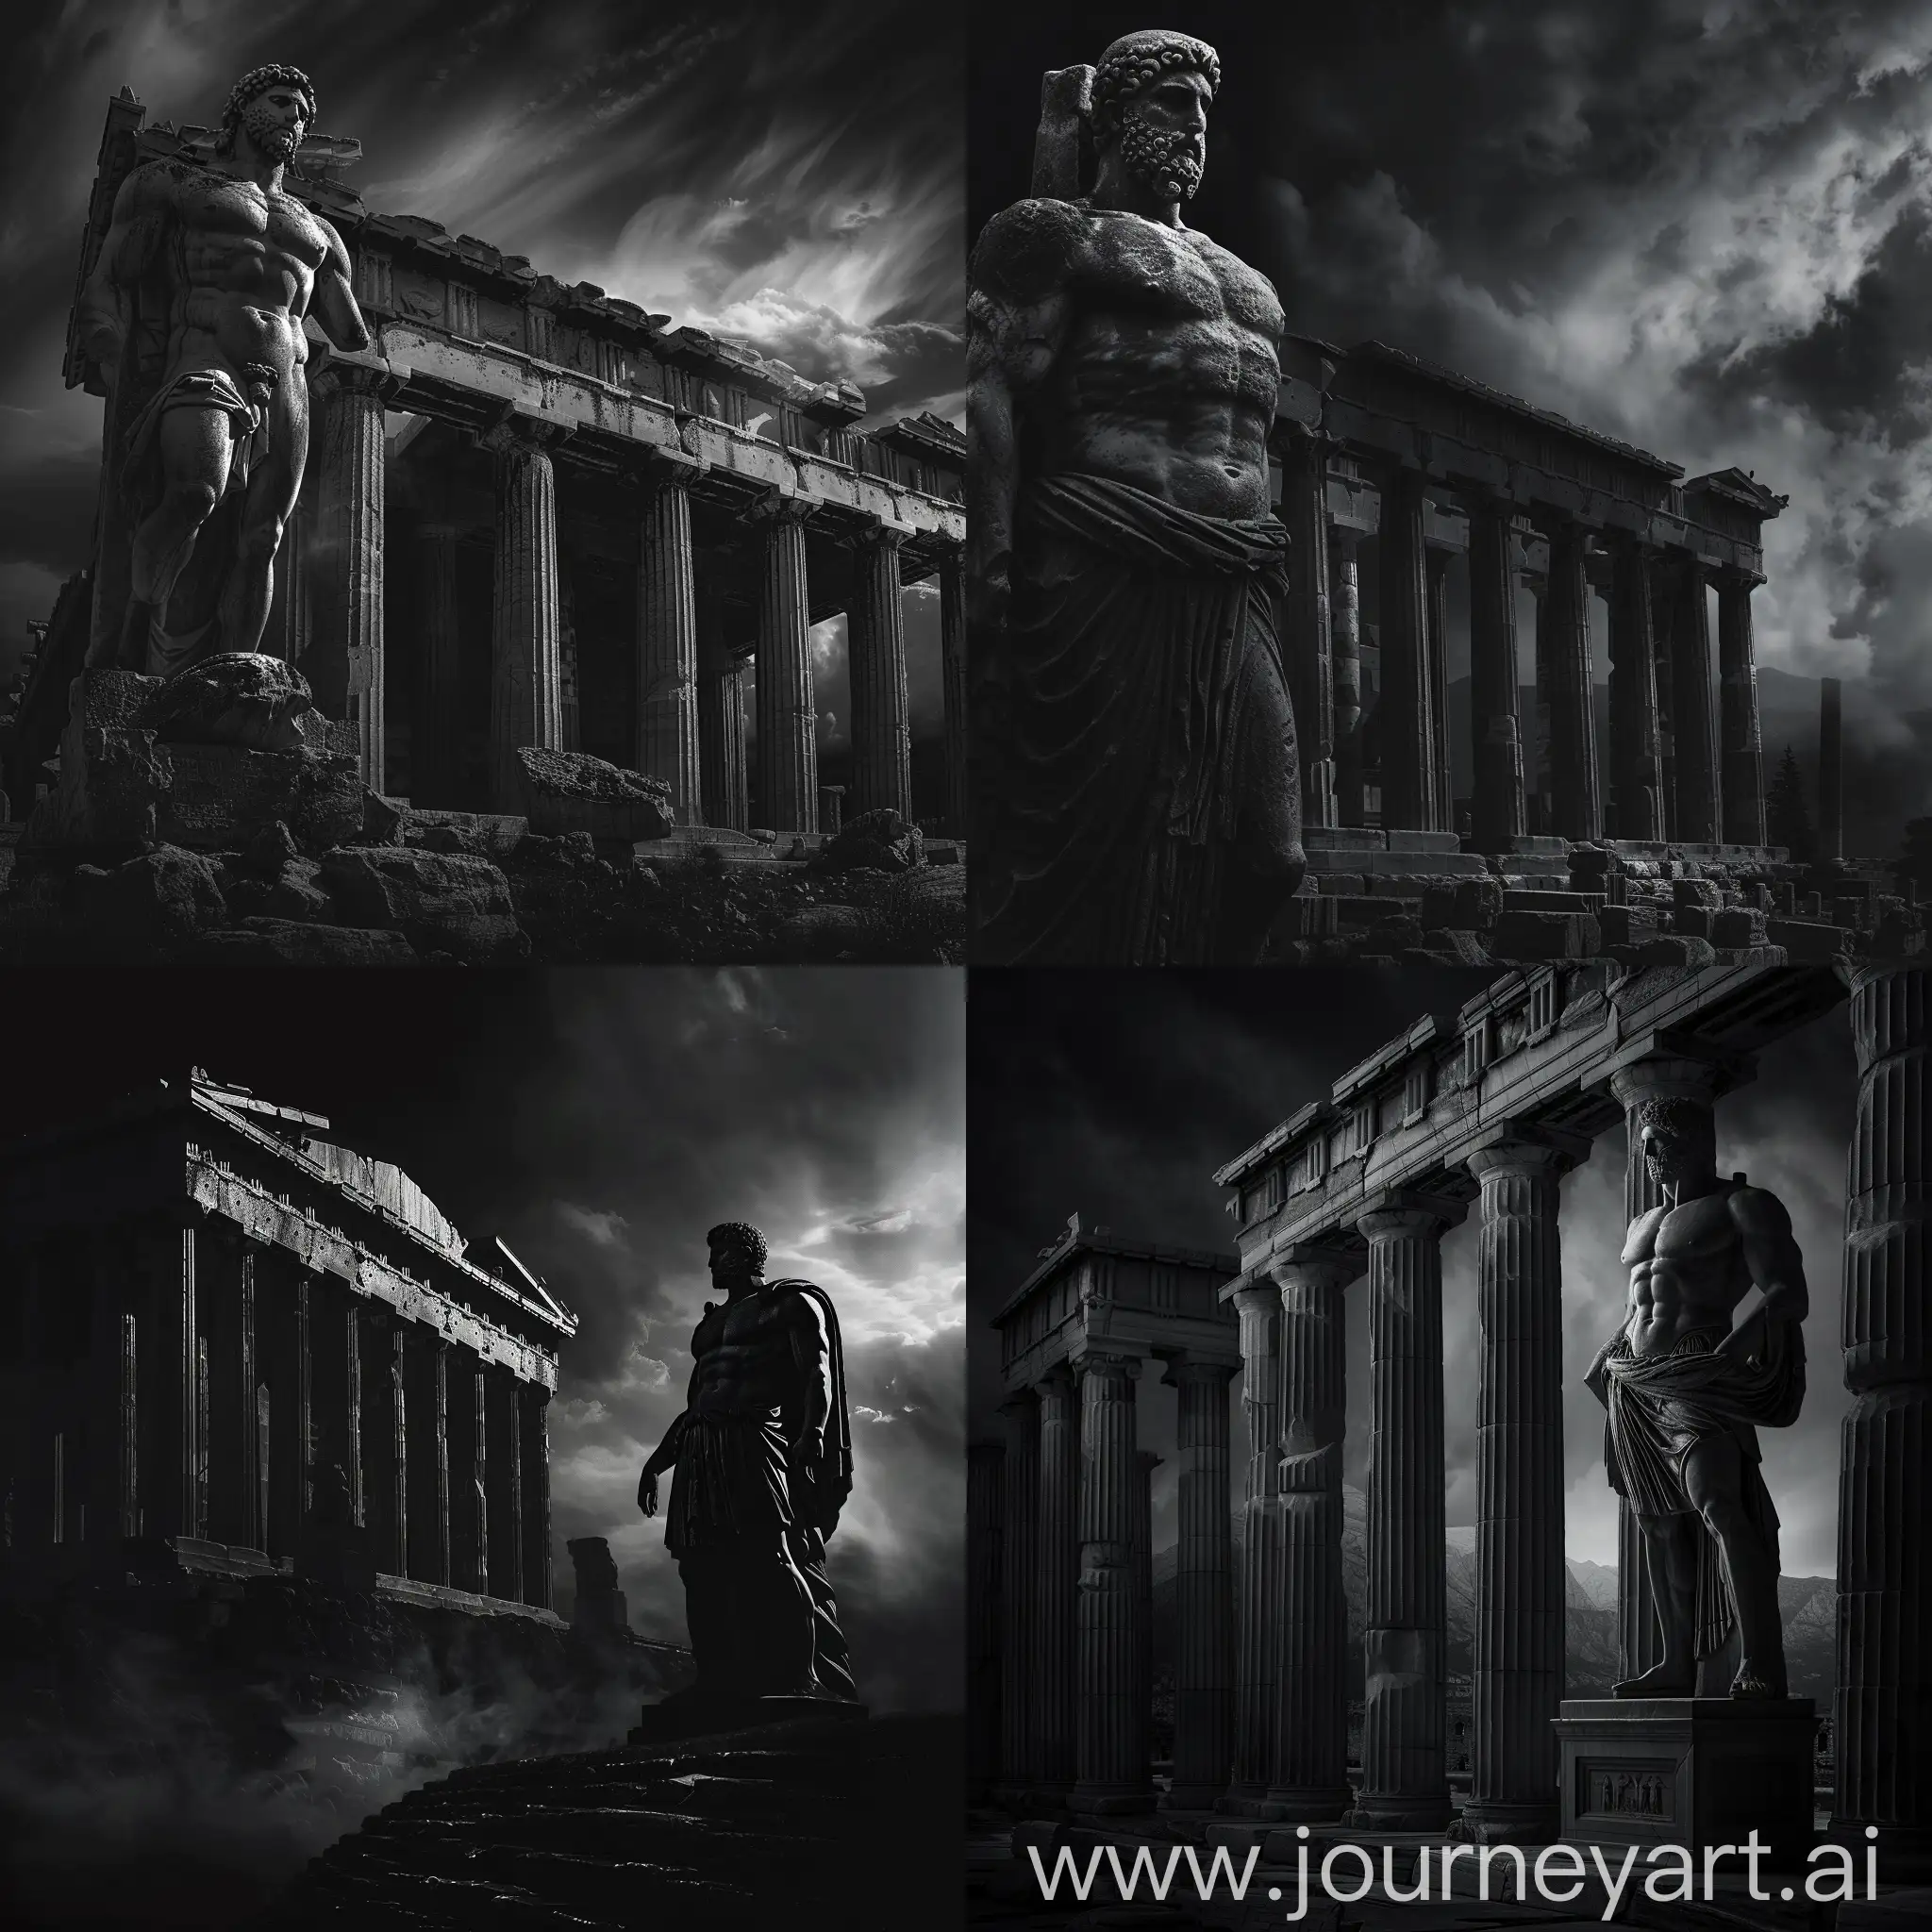 Stoic-Ancient-Greek-Society-Monochrome-Landscape-with-Iconic-Statue